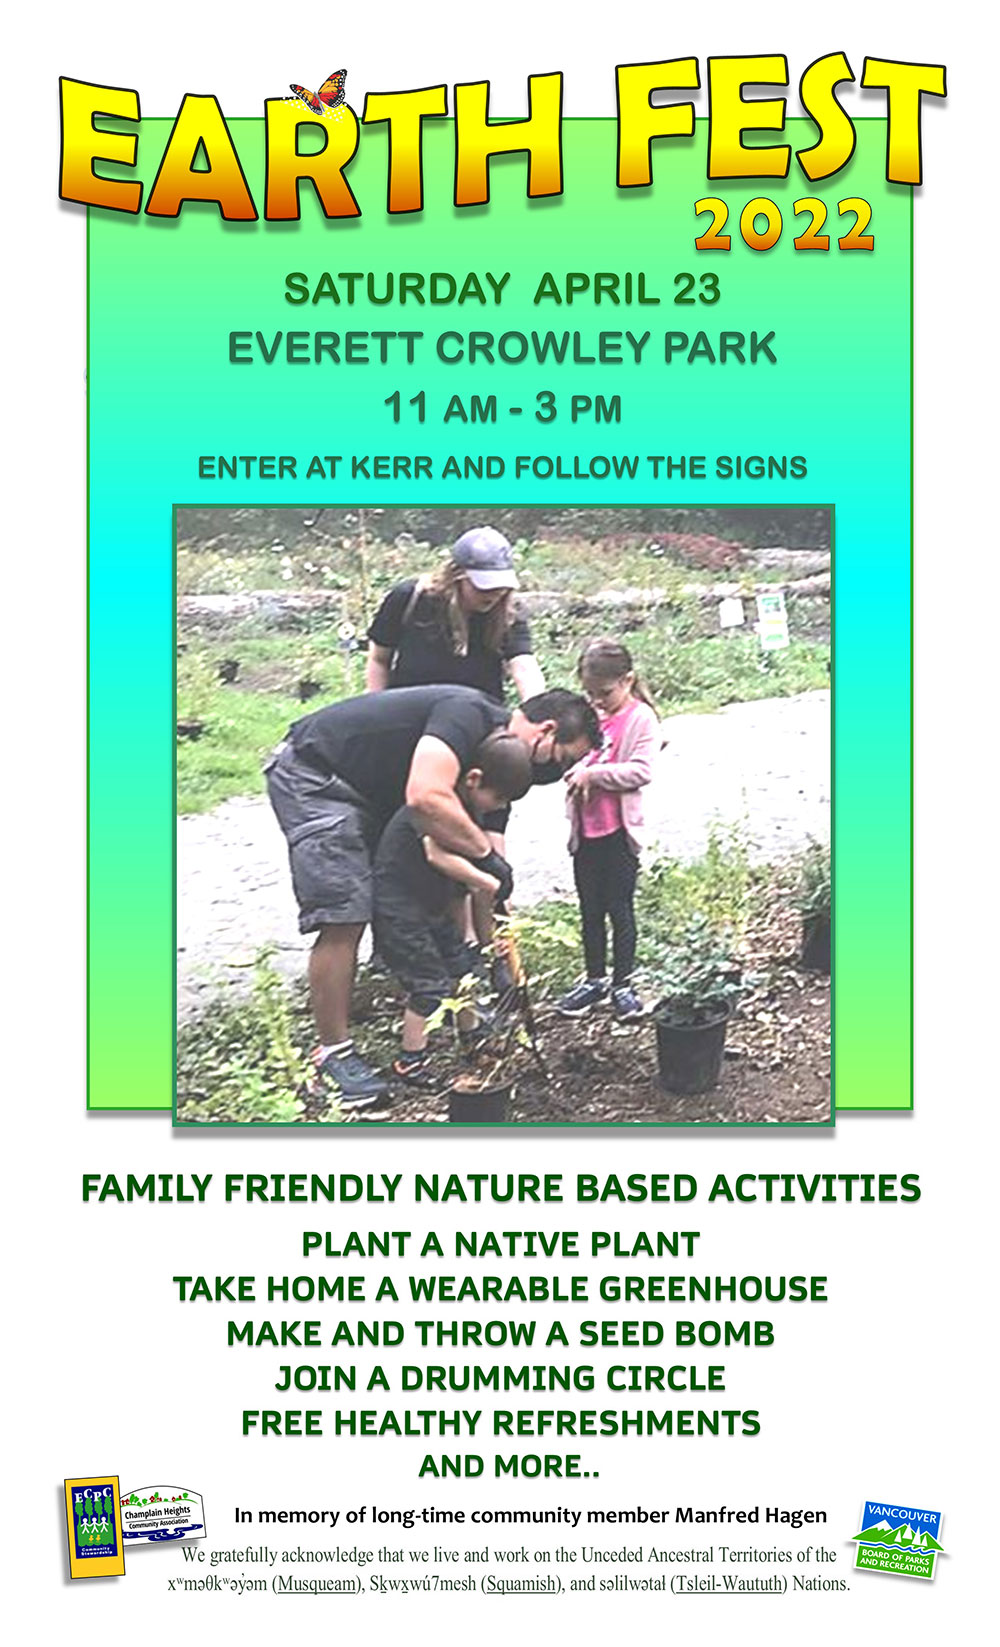 Earth Day 
SATURDAY APRIL 23 EVERETT CROWLEY PARK 11 AM - 3 PM
ENTER AT KERR AND FOLLOW THE SIGNS


FAMILY FRIENDLY NATURE BASED ACTIVITIES
PLANT A NATIVE PLANT
TAKE HOME A WEARABLE GREENHOUSE MAKE AND THROW A SEED BOMB
JOIN A DRUMMING CIRCLE
FREE HEALTHY REFRESHMENTS
AND MORE..
In memory of long-time community member Manfred Hagen
